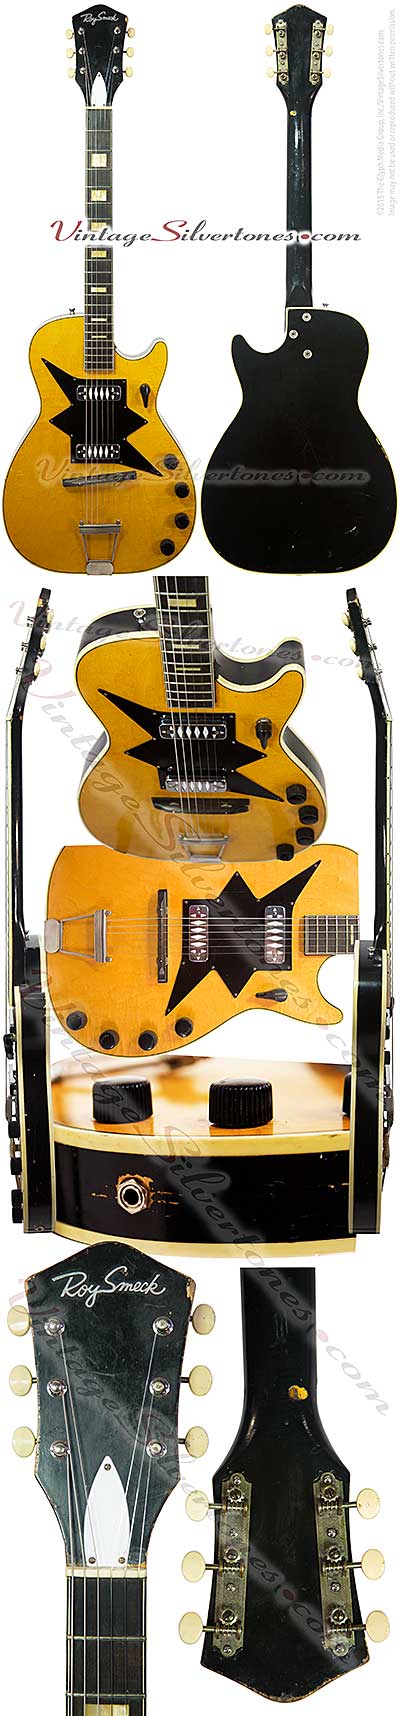 Roy Smeck- Harmony 7208, Stratotone natural top finish, black back and sides, two pickups, made in Chicago circa 1962